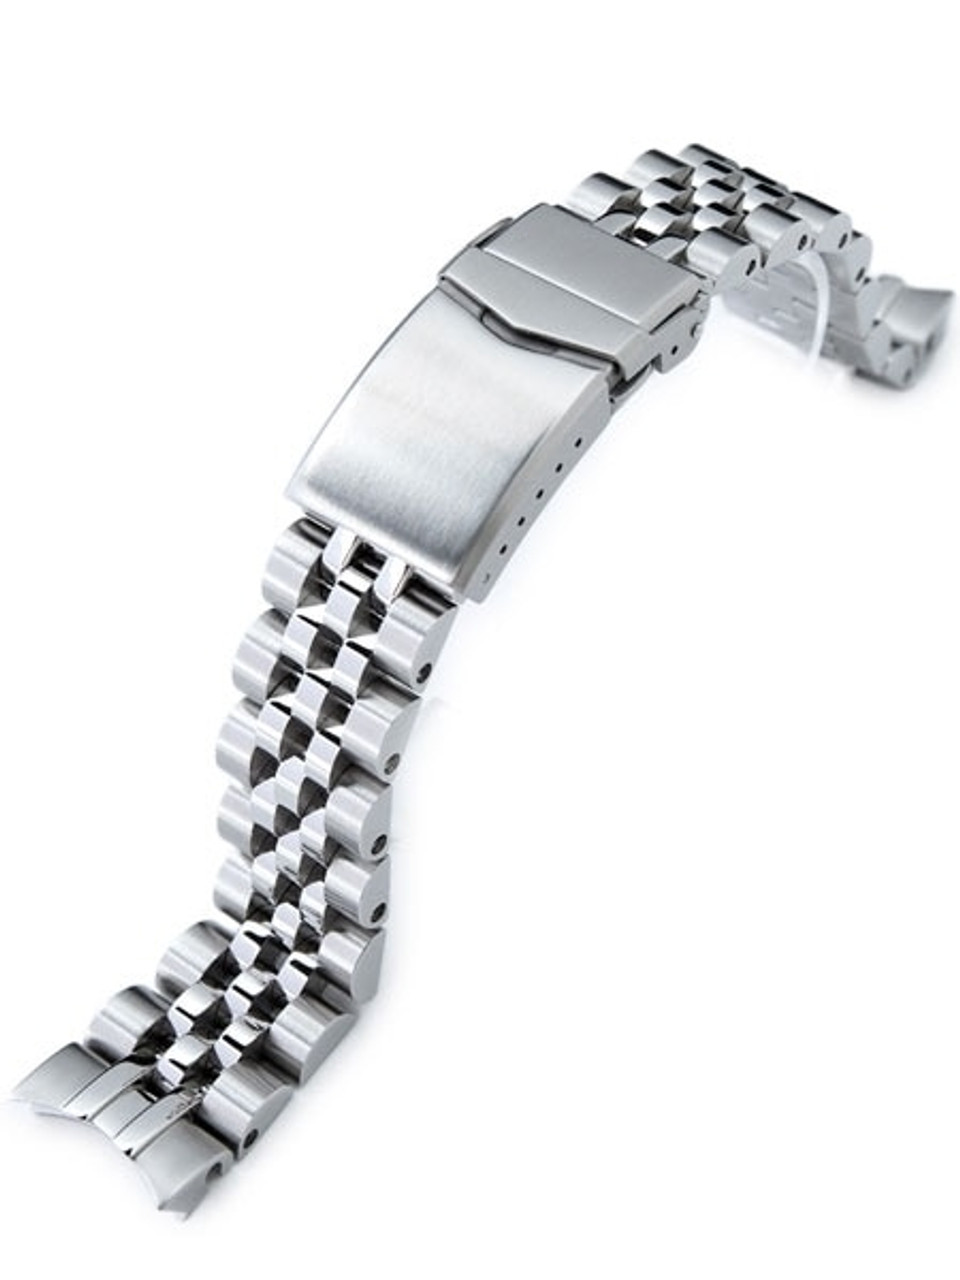 Strapcode Stainless Steel ANGUS Jubilee Bracelet for Seiko SARB035  #SS201820B077 (20mm)